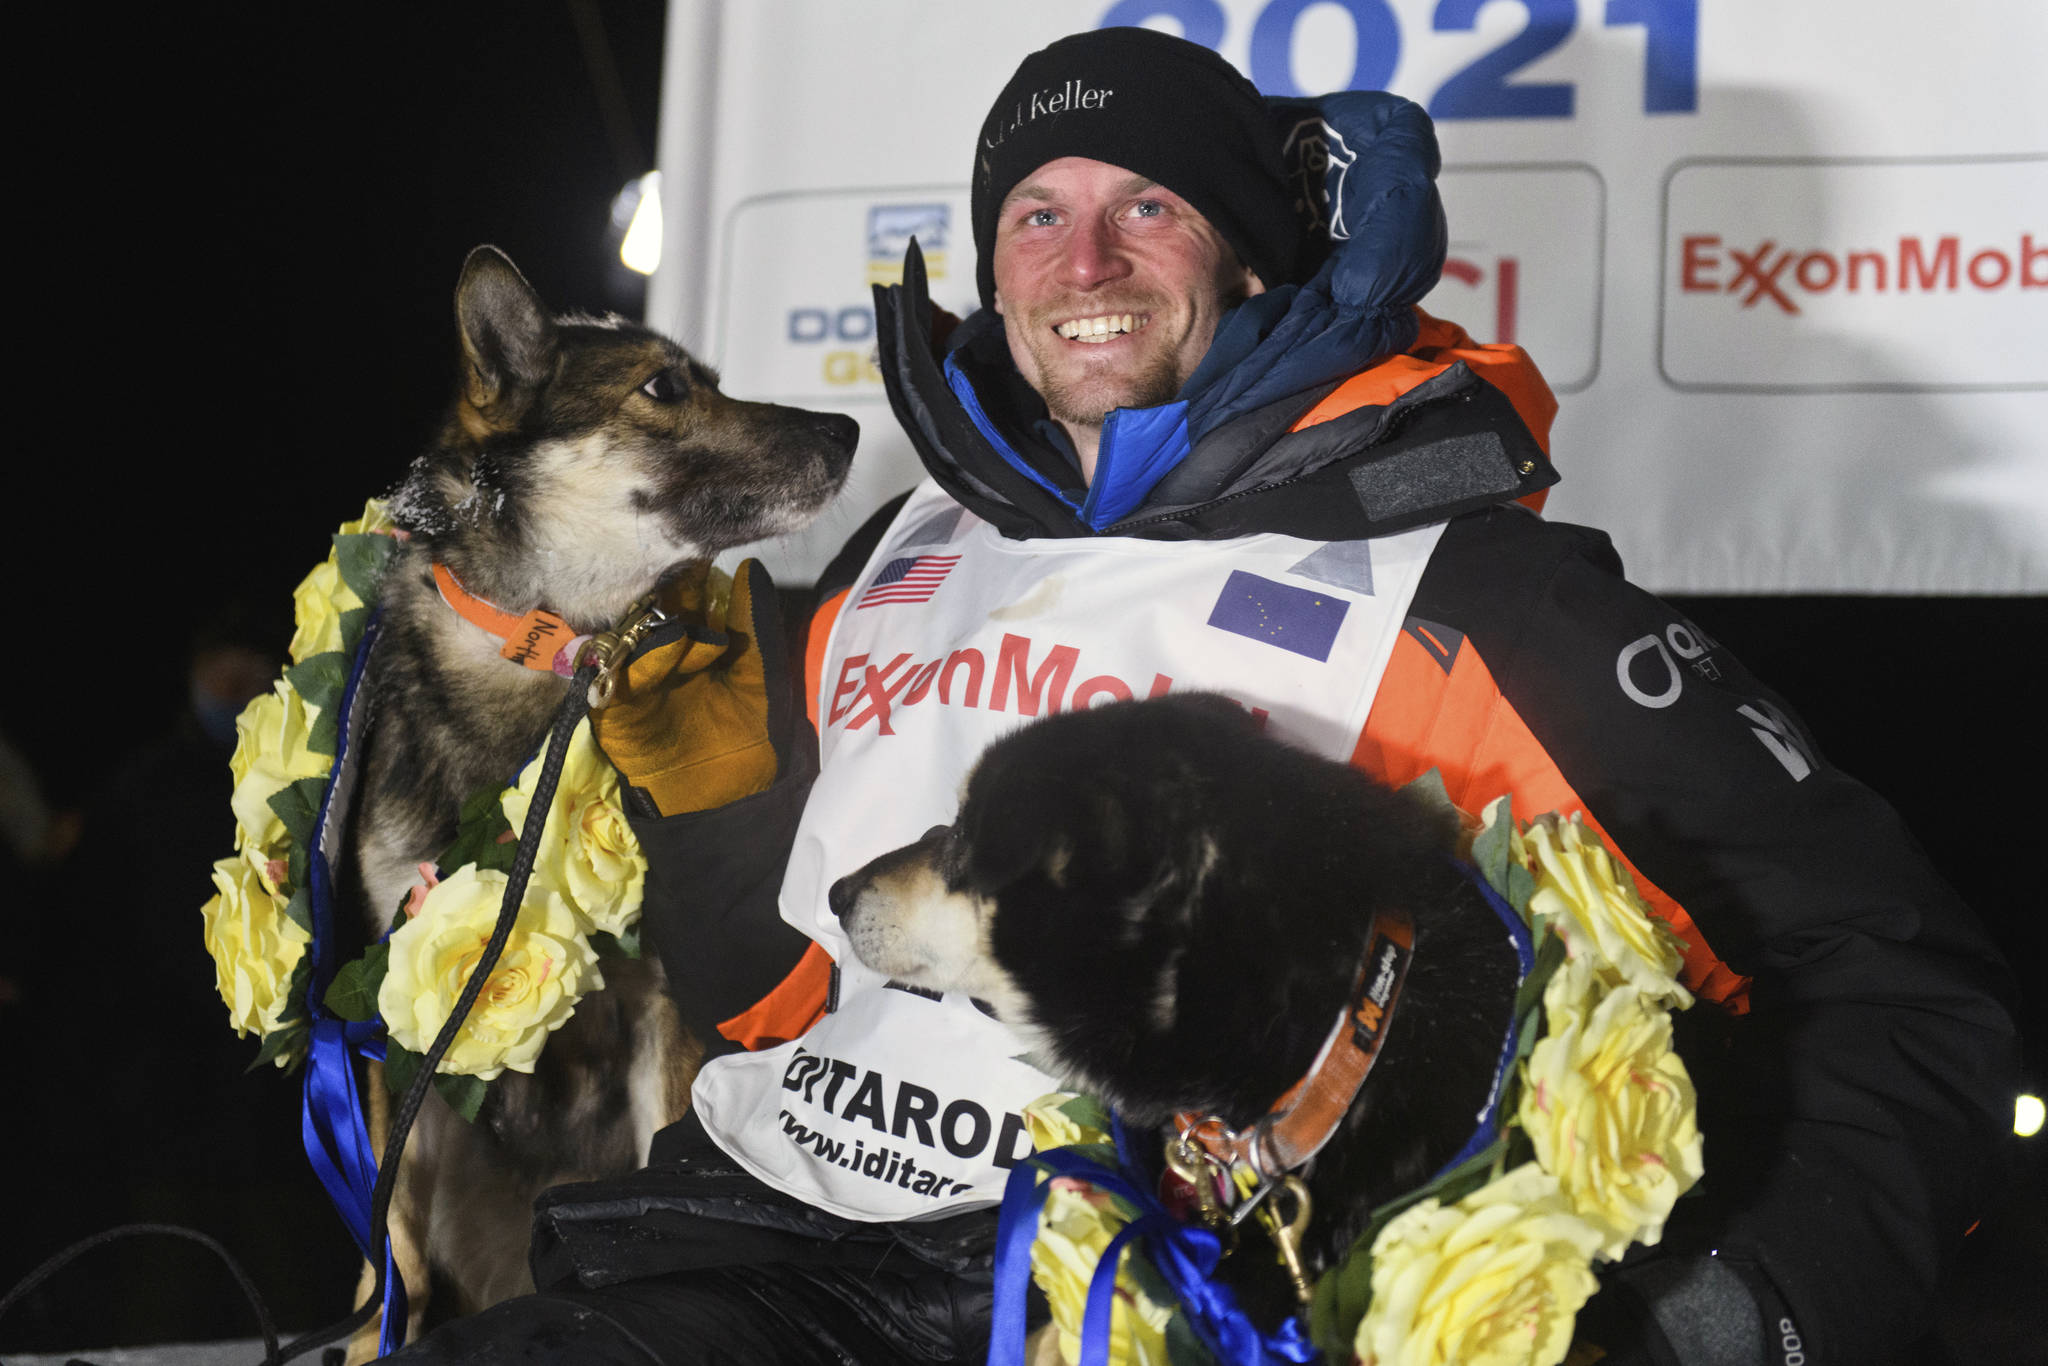 Dallas Seavey poses with his dogs after winning the Iditarod Trail Sled Dog Race race near Willow, Alaska, early Monday, March 15, 2021. (Marc Lester/Anchorage Daily News via AP, Pool)